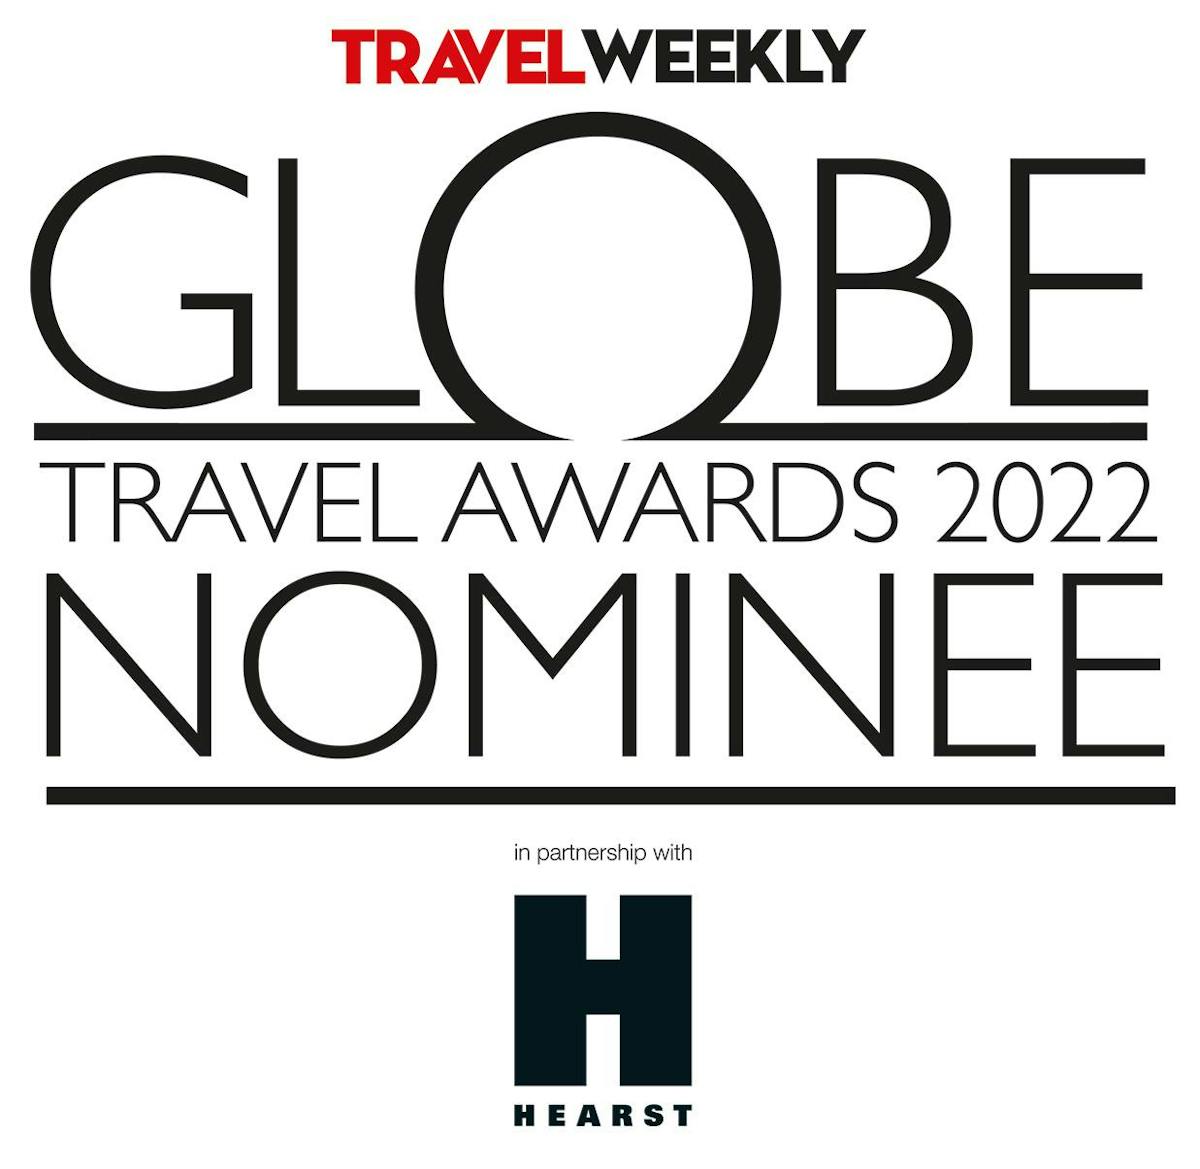 Nomination for Travel Weekly's Globe Travel Awards 2022